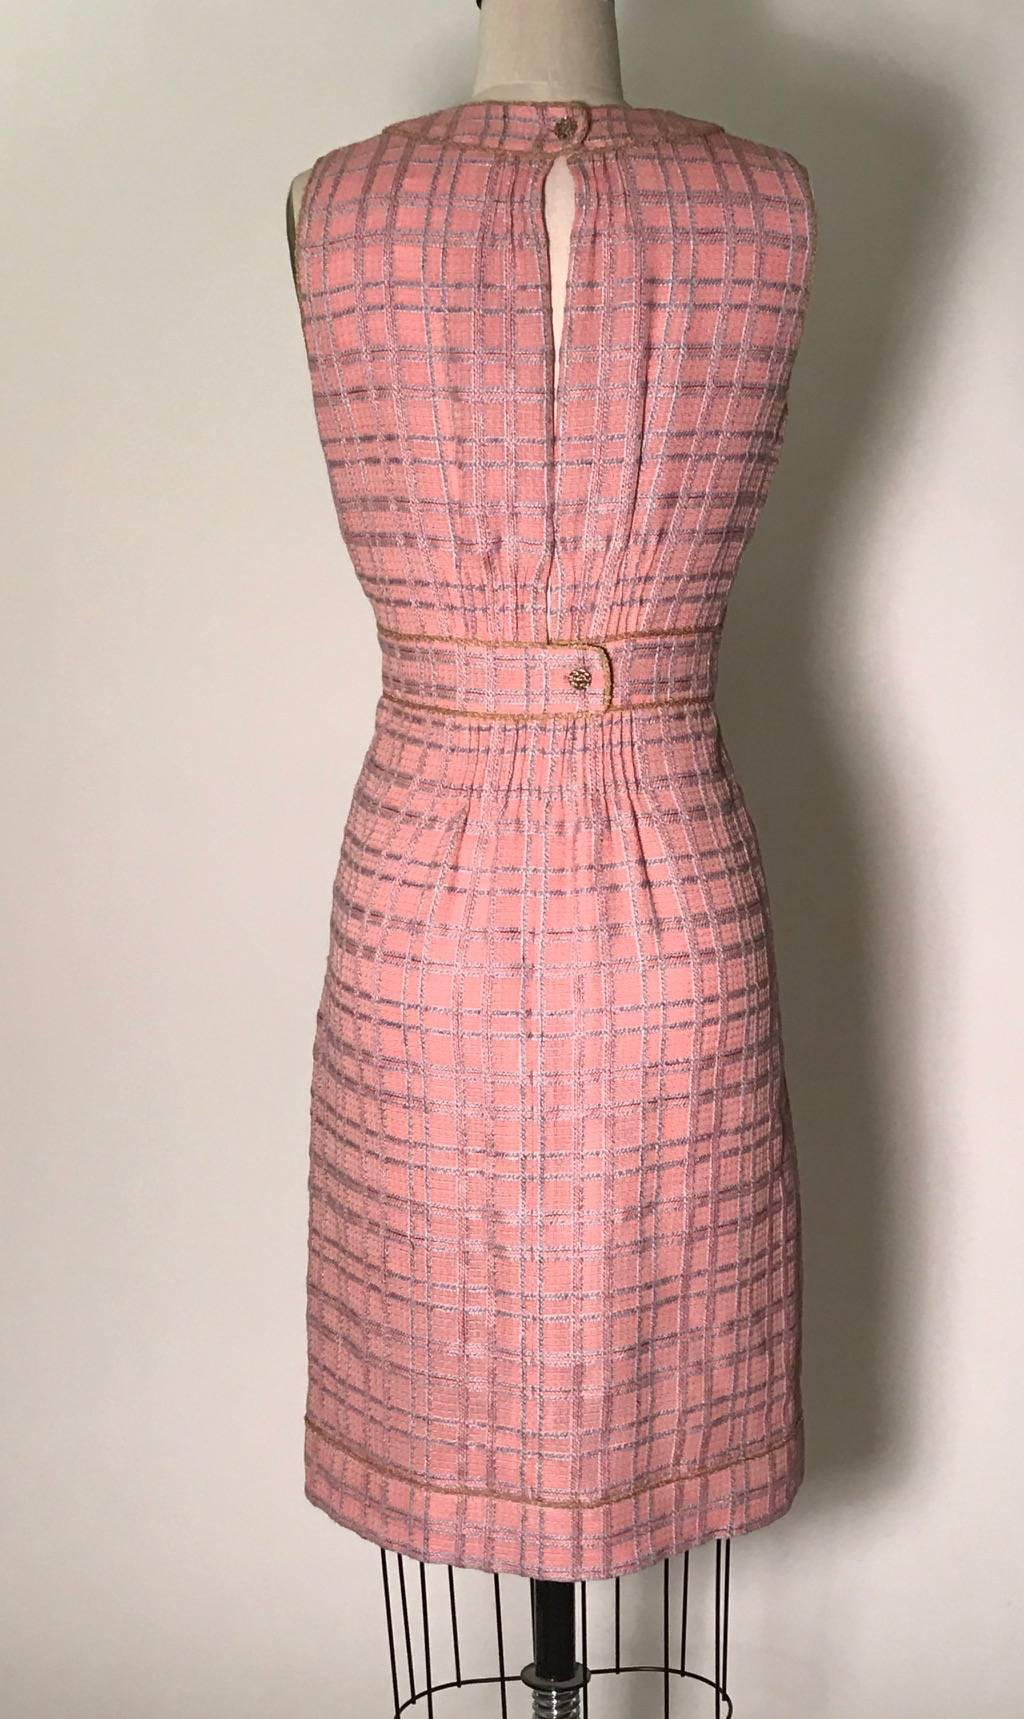 Pink and pale blue plaid sleeveless tweed dress with tan piping. Small pleat details at front. Gold CC logo buttons at back neck and waist. Slit at center back from neck to waist, fastens near middle with snap (snap may have been added.) Zip and